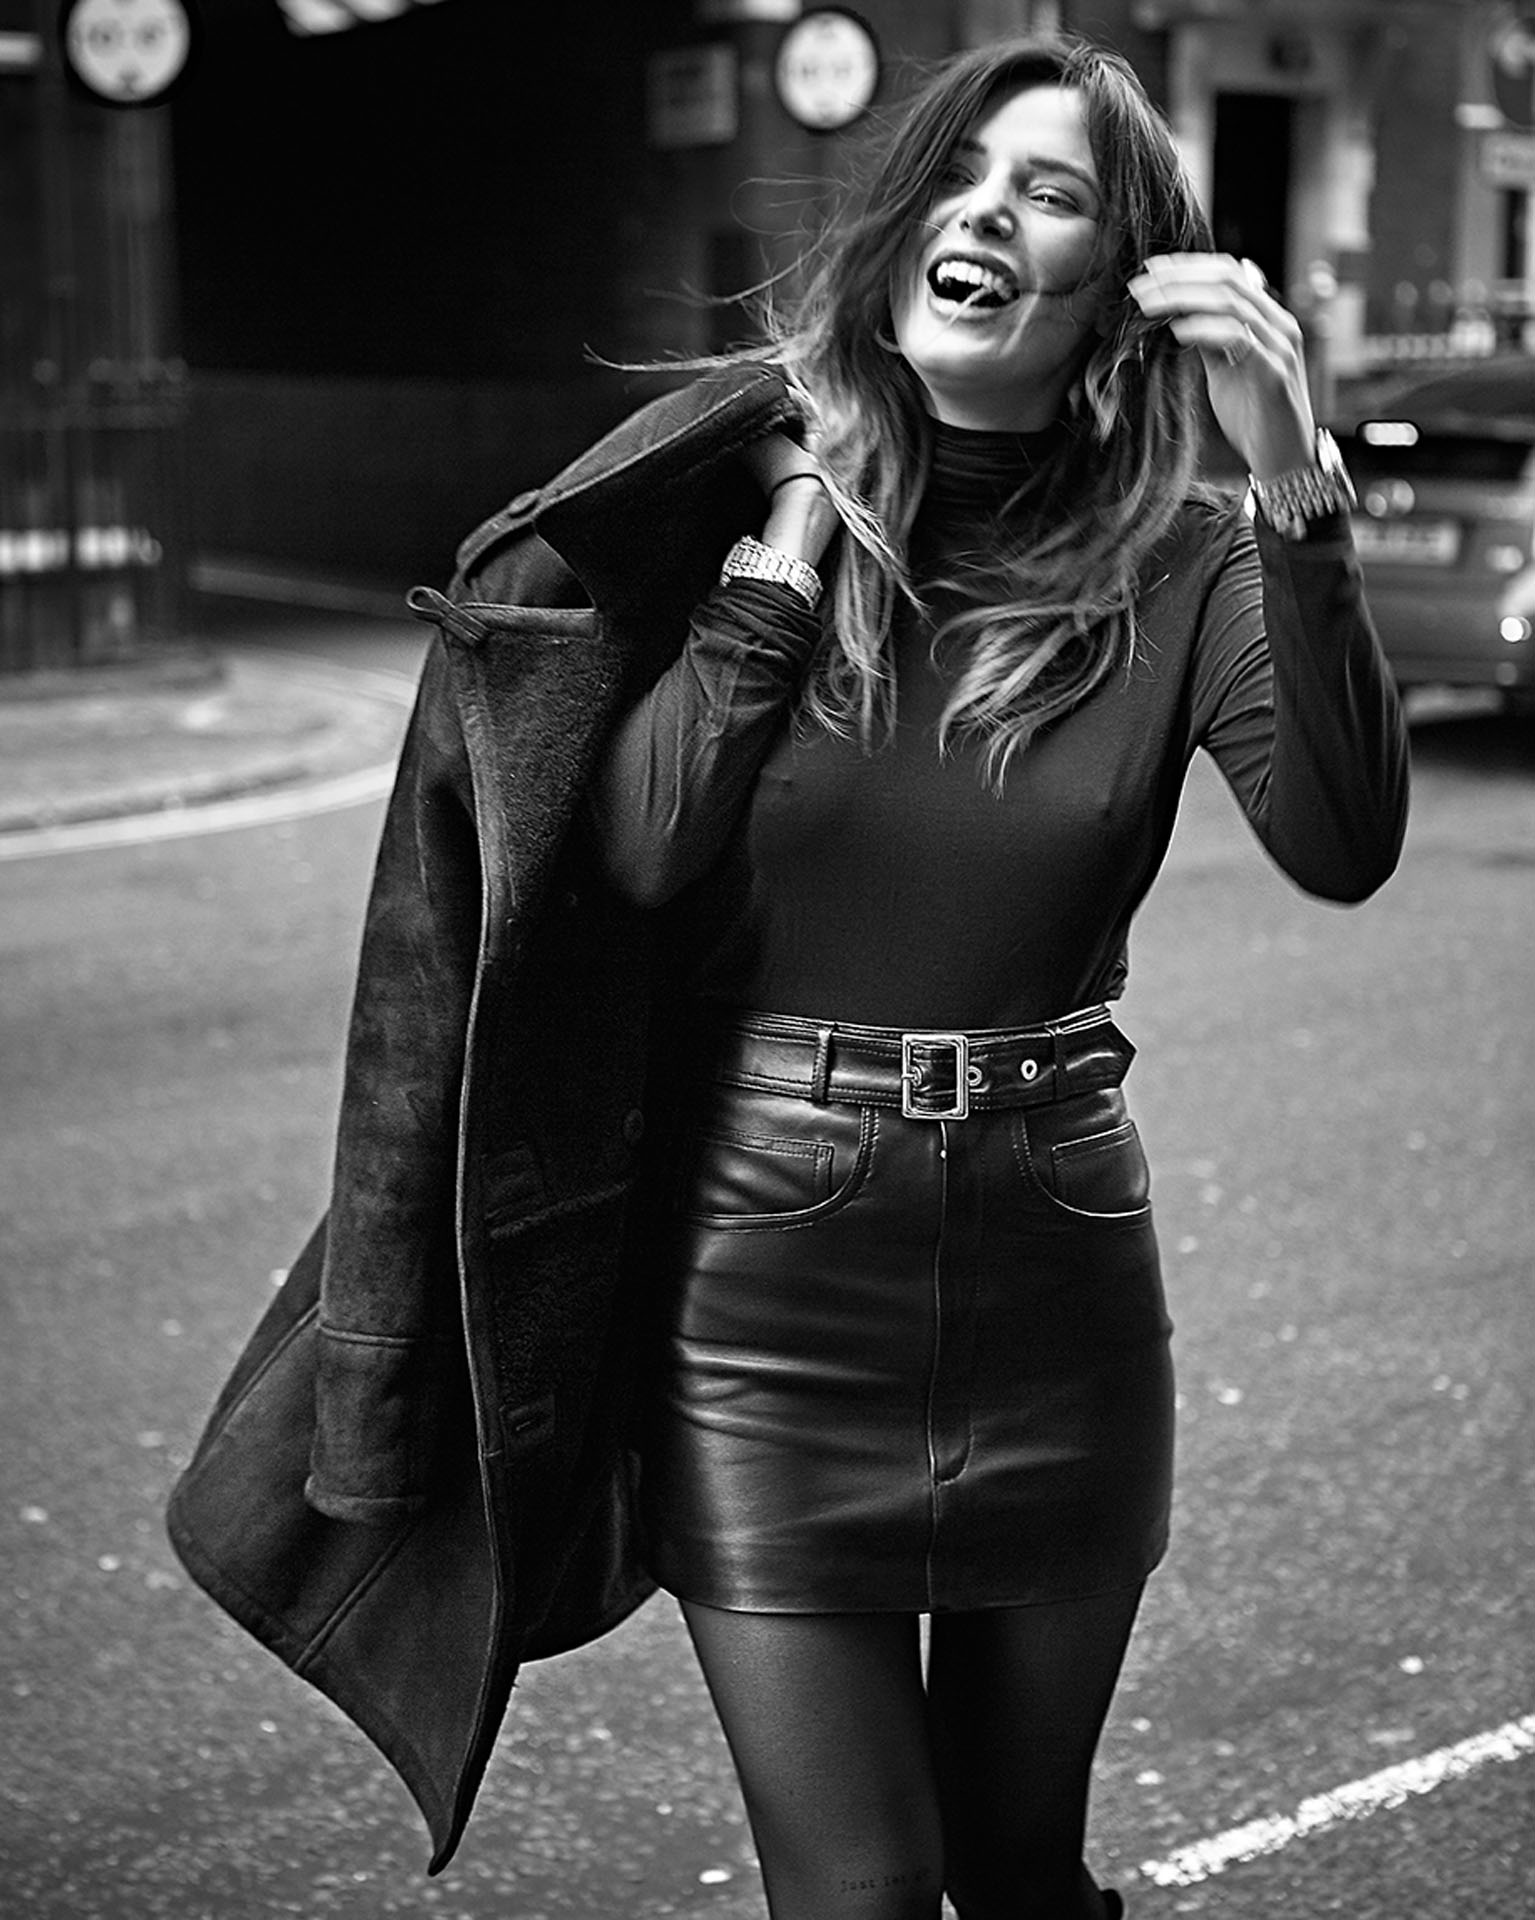 Bella Thorne photographed by David Hatters for Matchless London